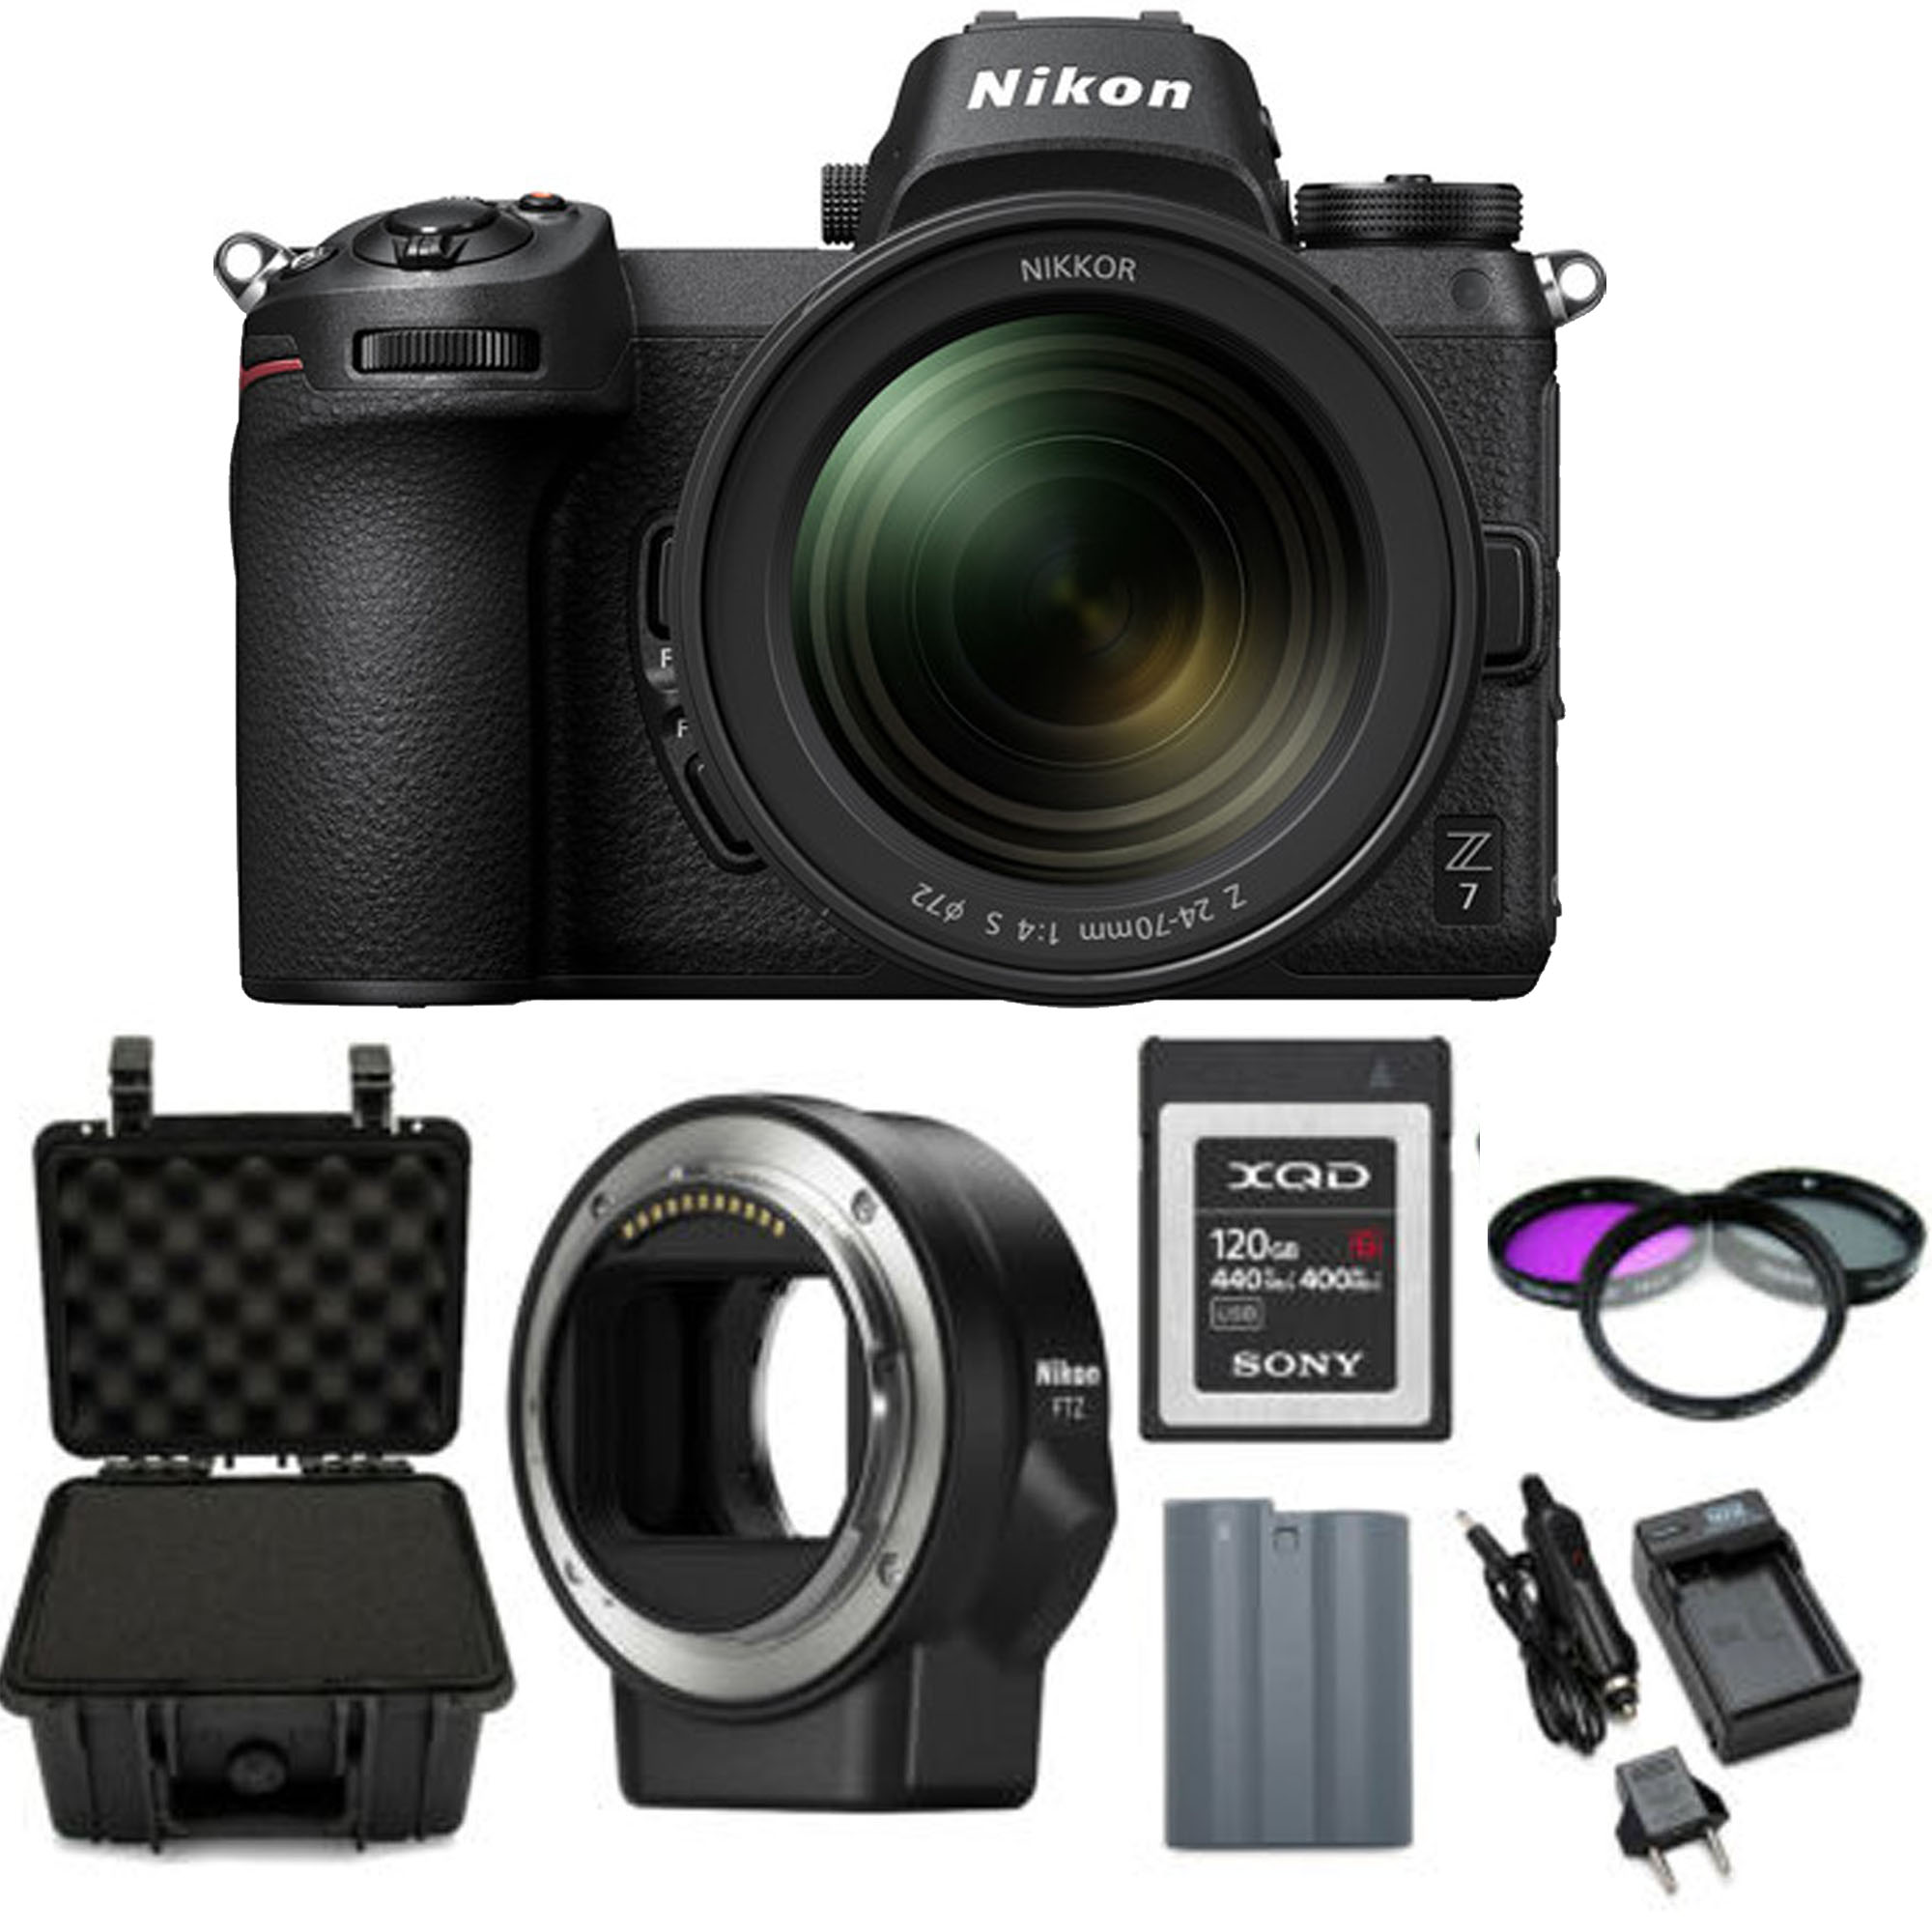 Nikon Z7 Mirrorless Digital Camera with 24:70mm Lens with Mount Adapter Bundle USA - image 1 of 1